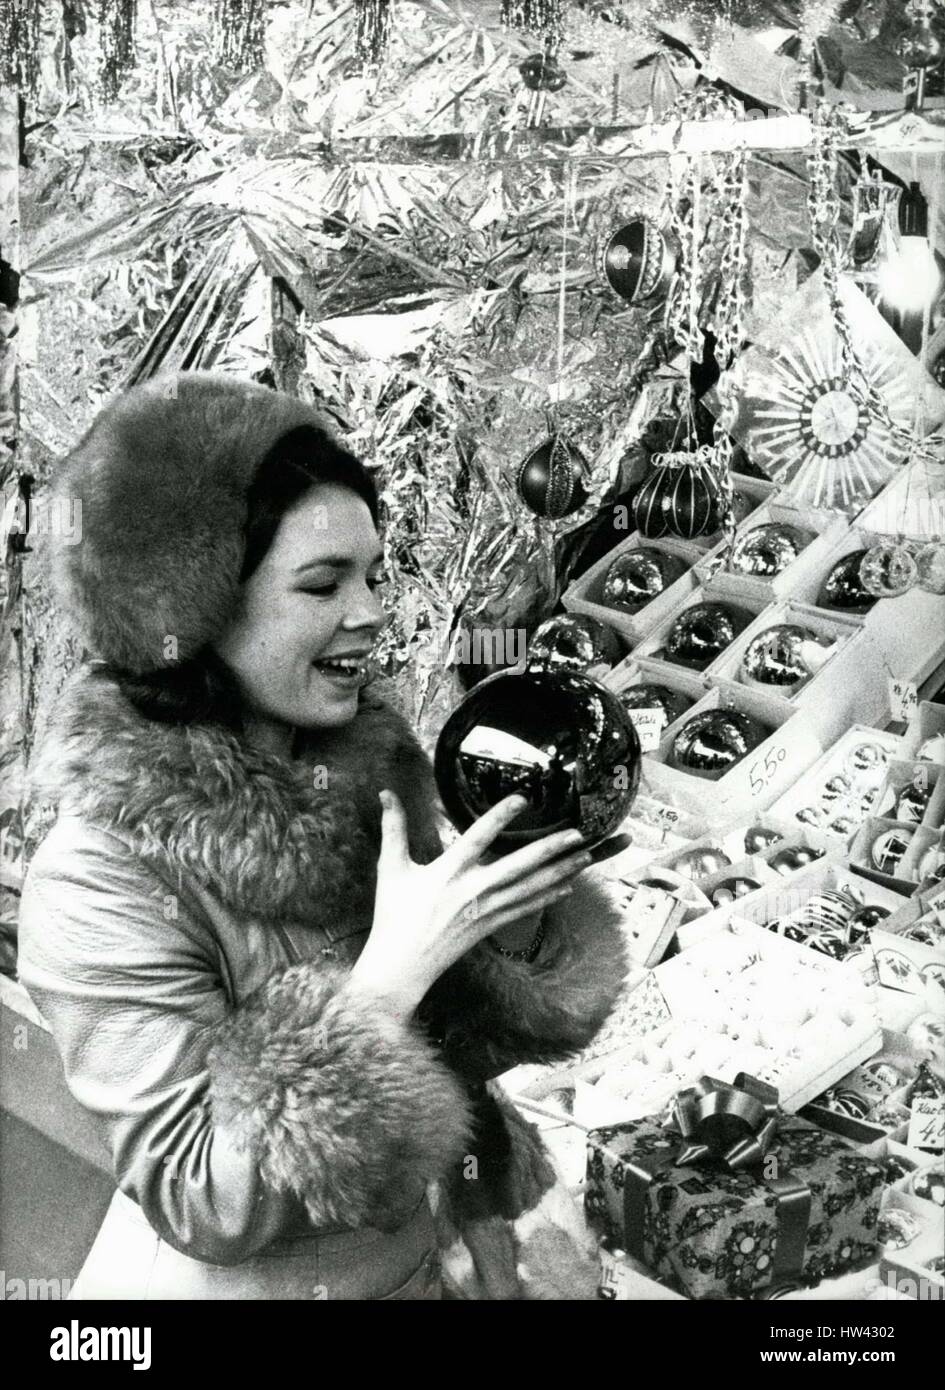 Dec. 15, 1970 - Irish Singer Dana at Munich's ''Christkindlmarkt''. Singer Dana enjoyed her 'shopping walk' at Munich's ''Christkindlmarkt'' like a child. the 20 year old Irish girl, with the song ''All kinds of everything'' winner of the Grand Prix song festival 1970 was not only surprised by all the little things but she also bought many things: many Christmas tree balls and other decorations for the huge Christmas tree in her home town Londonderry, gingerbread and almonds as taste for herself. Dana Brown, accompanied by her father, who is her manager, came to Munich in business matter. OPS: Stock Photo